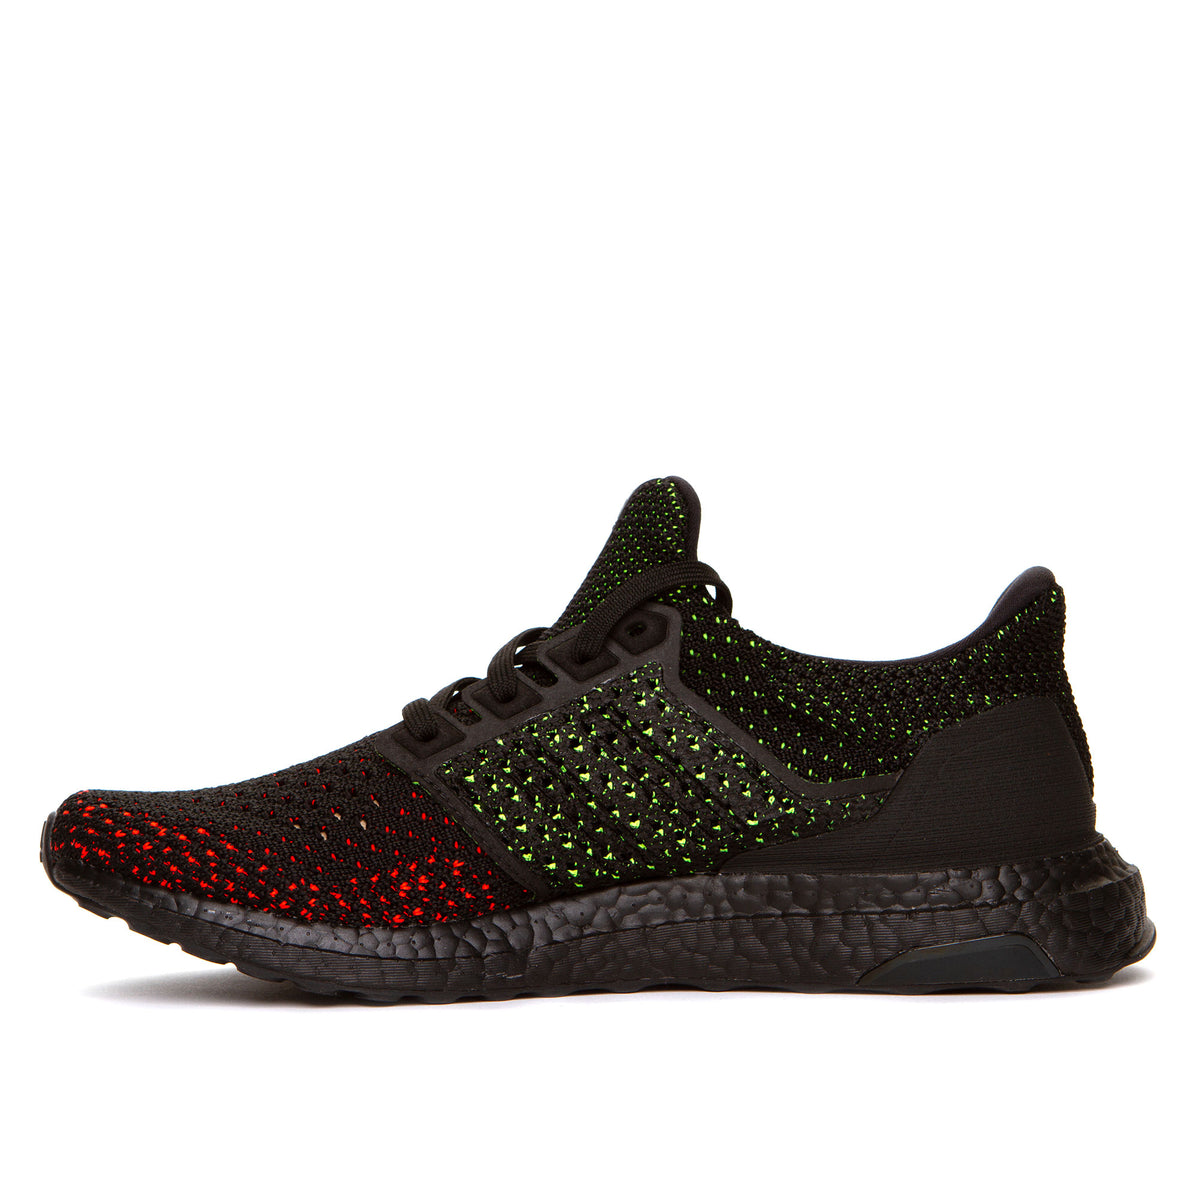 Adidas Ultraboost Clima Running Shoes